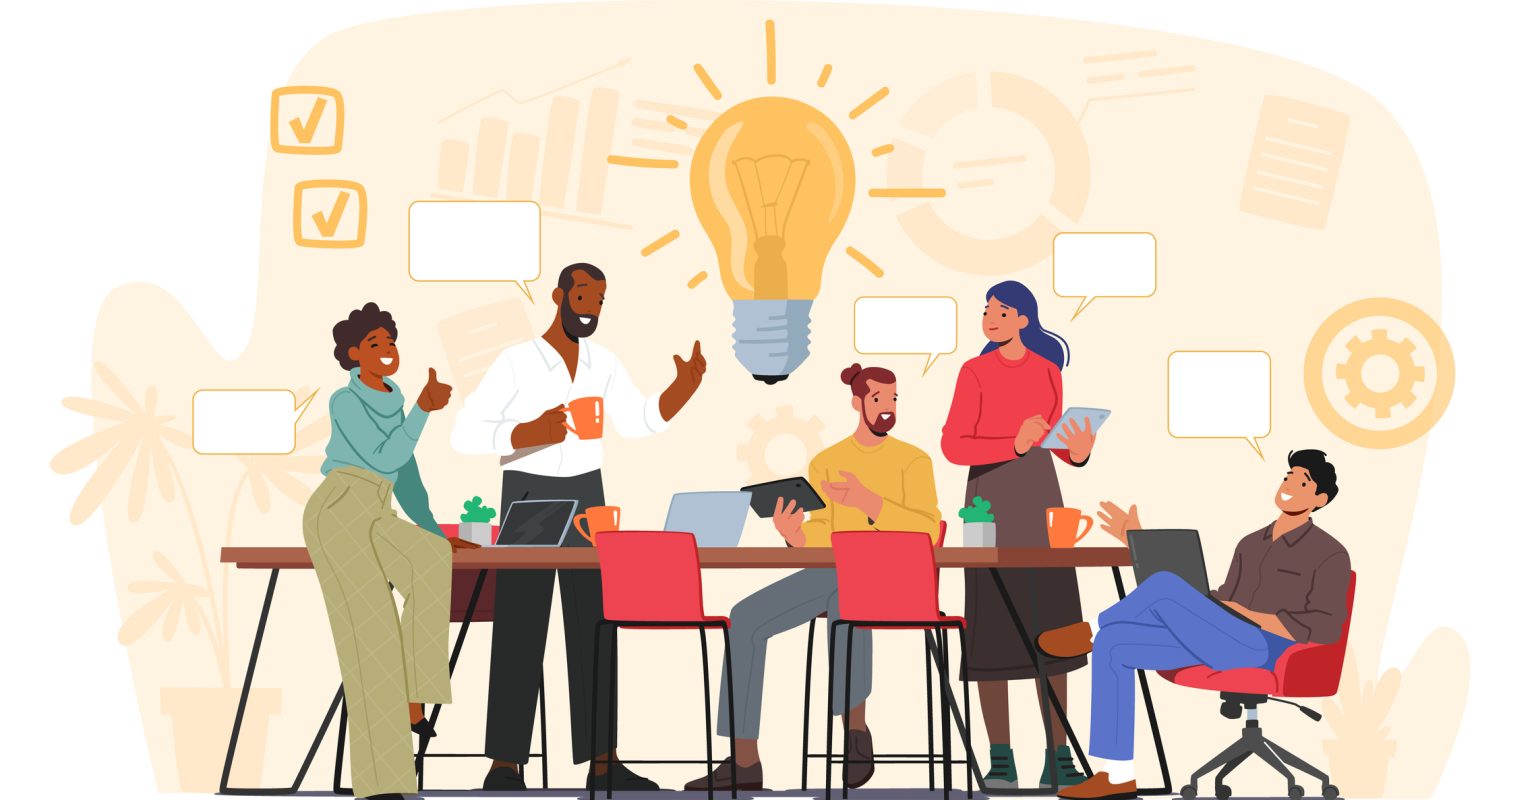 Brainstorming Team Concept. Business People Discussing Idea on Board Meeting in Office. Teamwork Project Development Process. Employees Work on Laptops and Communicate. Cartoon Vector Illustration